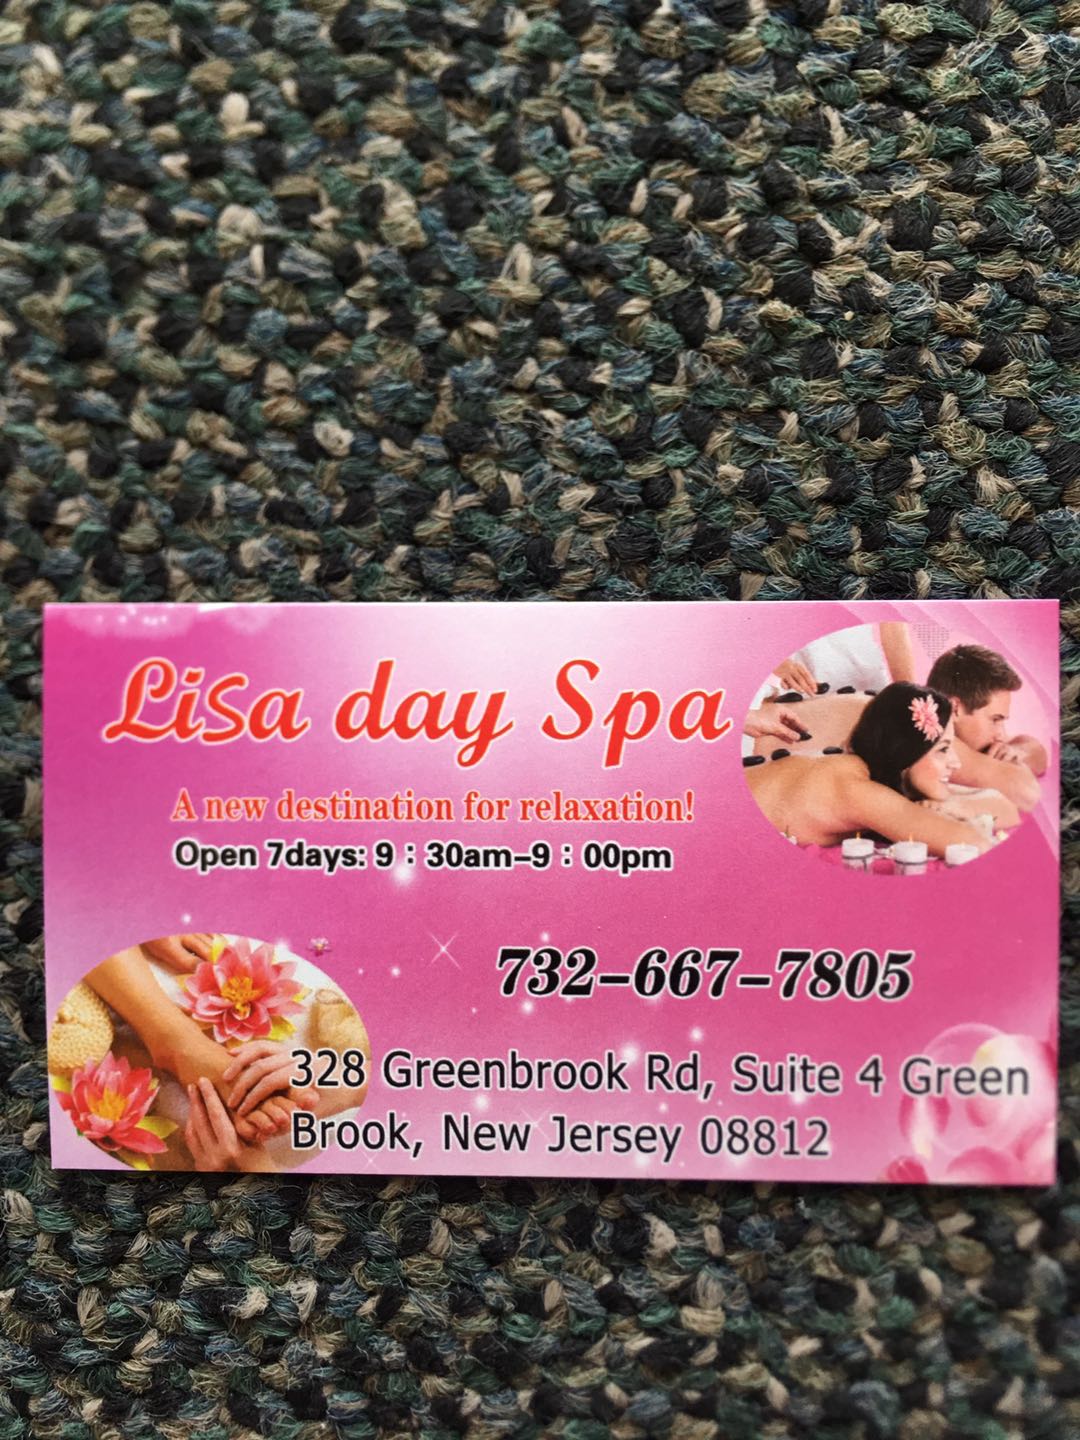 Lisa Day Spa 328 Greenbrook Rd Suite 4, Green Brook New Jersey 08812